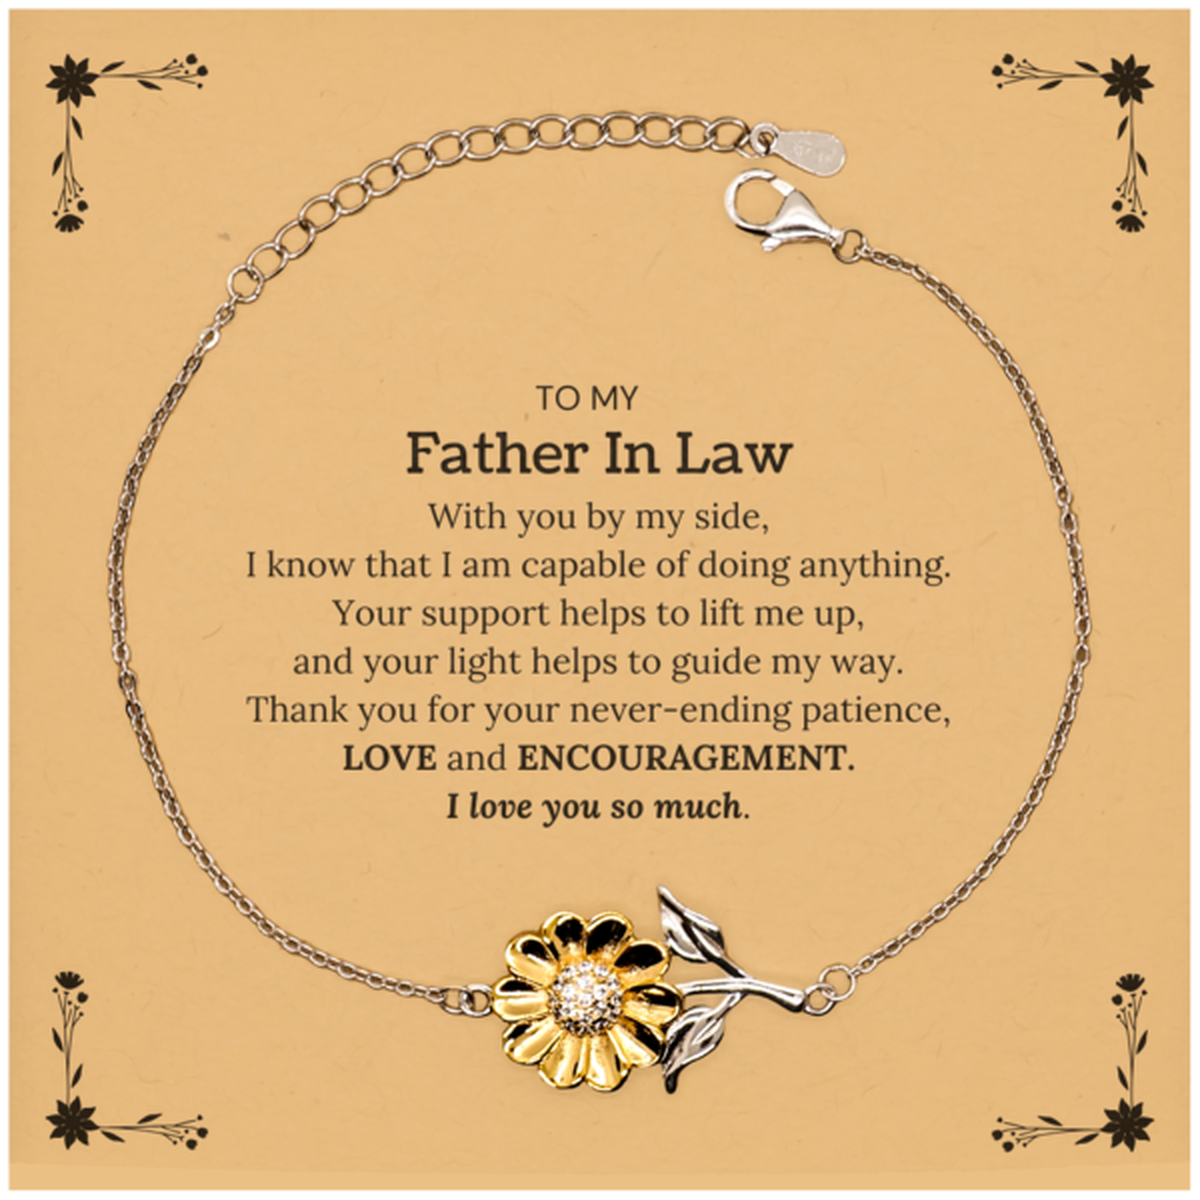 Appreciation Father In Law Sunflower Bracelet Gifts, To My Father In Law Birthday Christmas Wedding Keepsake Gifts for Father In Law With you by my side, I know that I am capable of doing anything. I love you so much